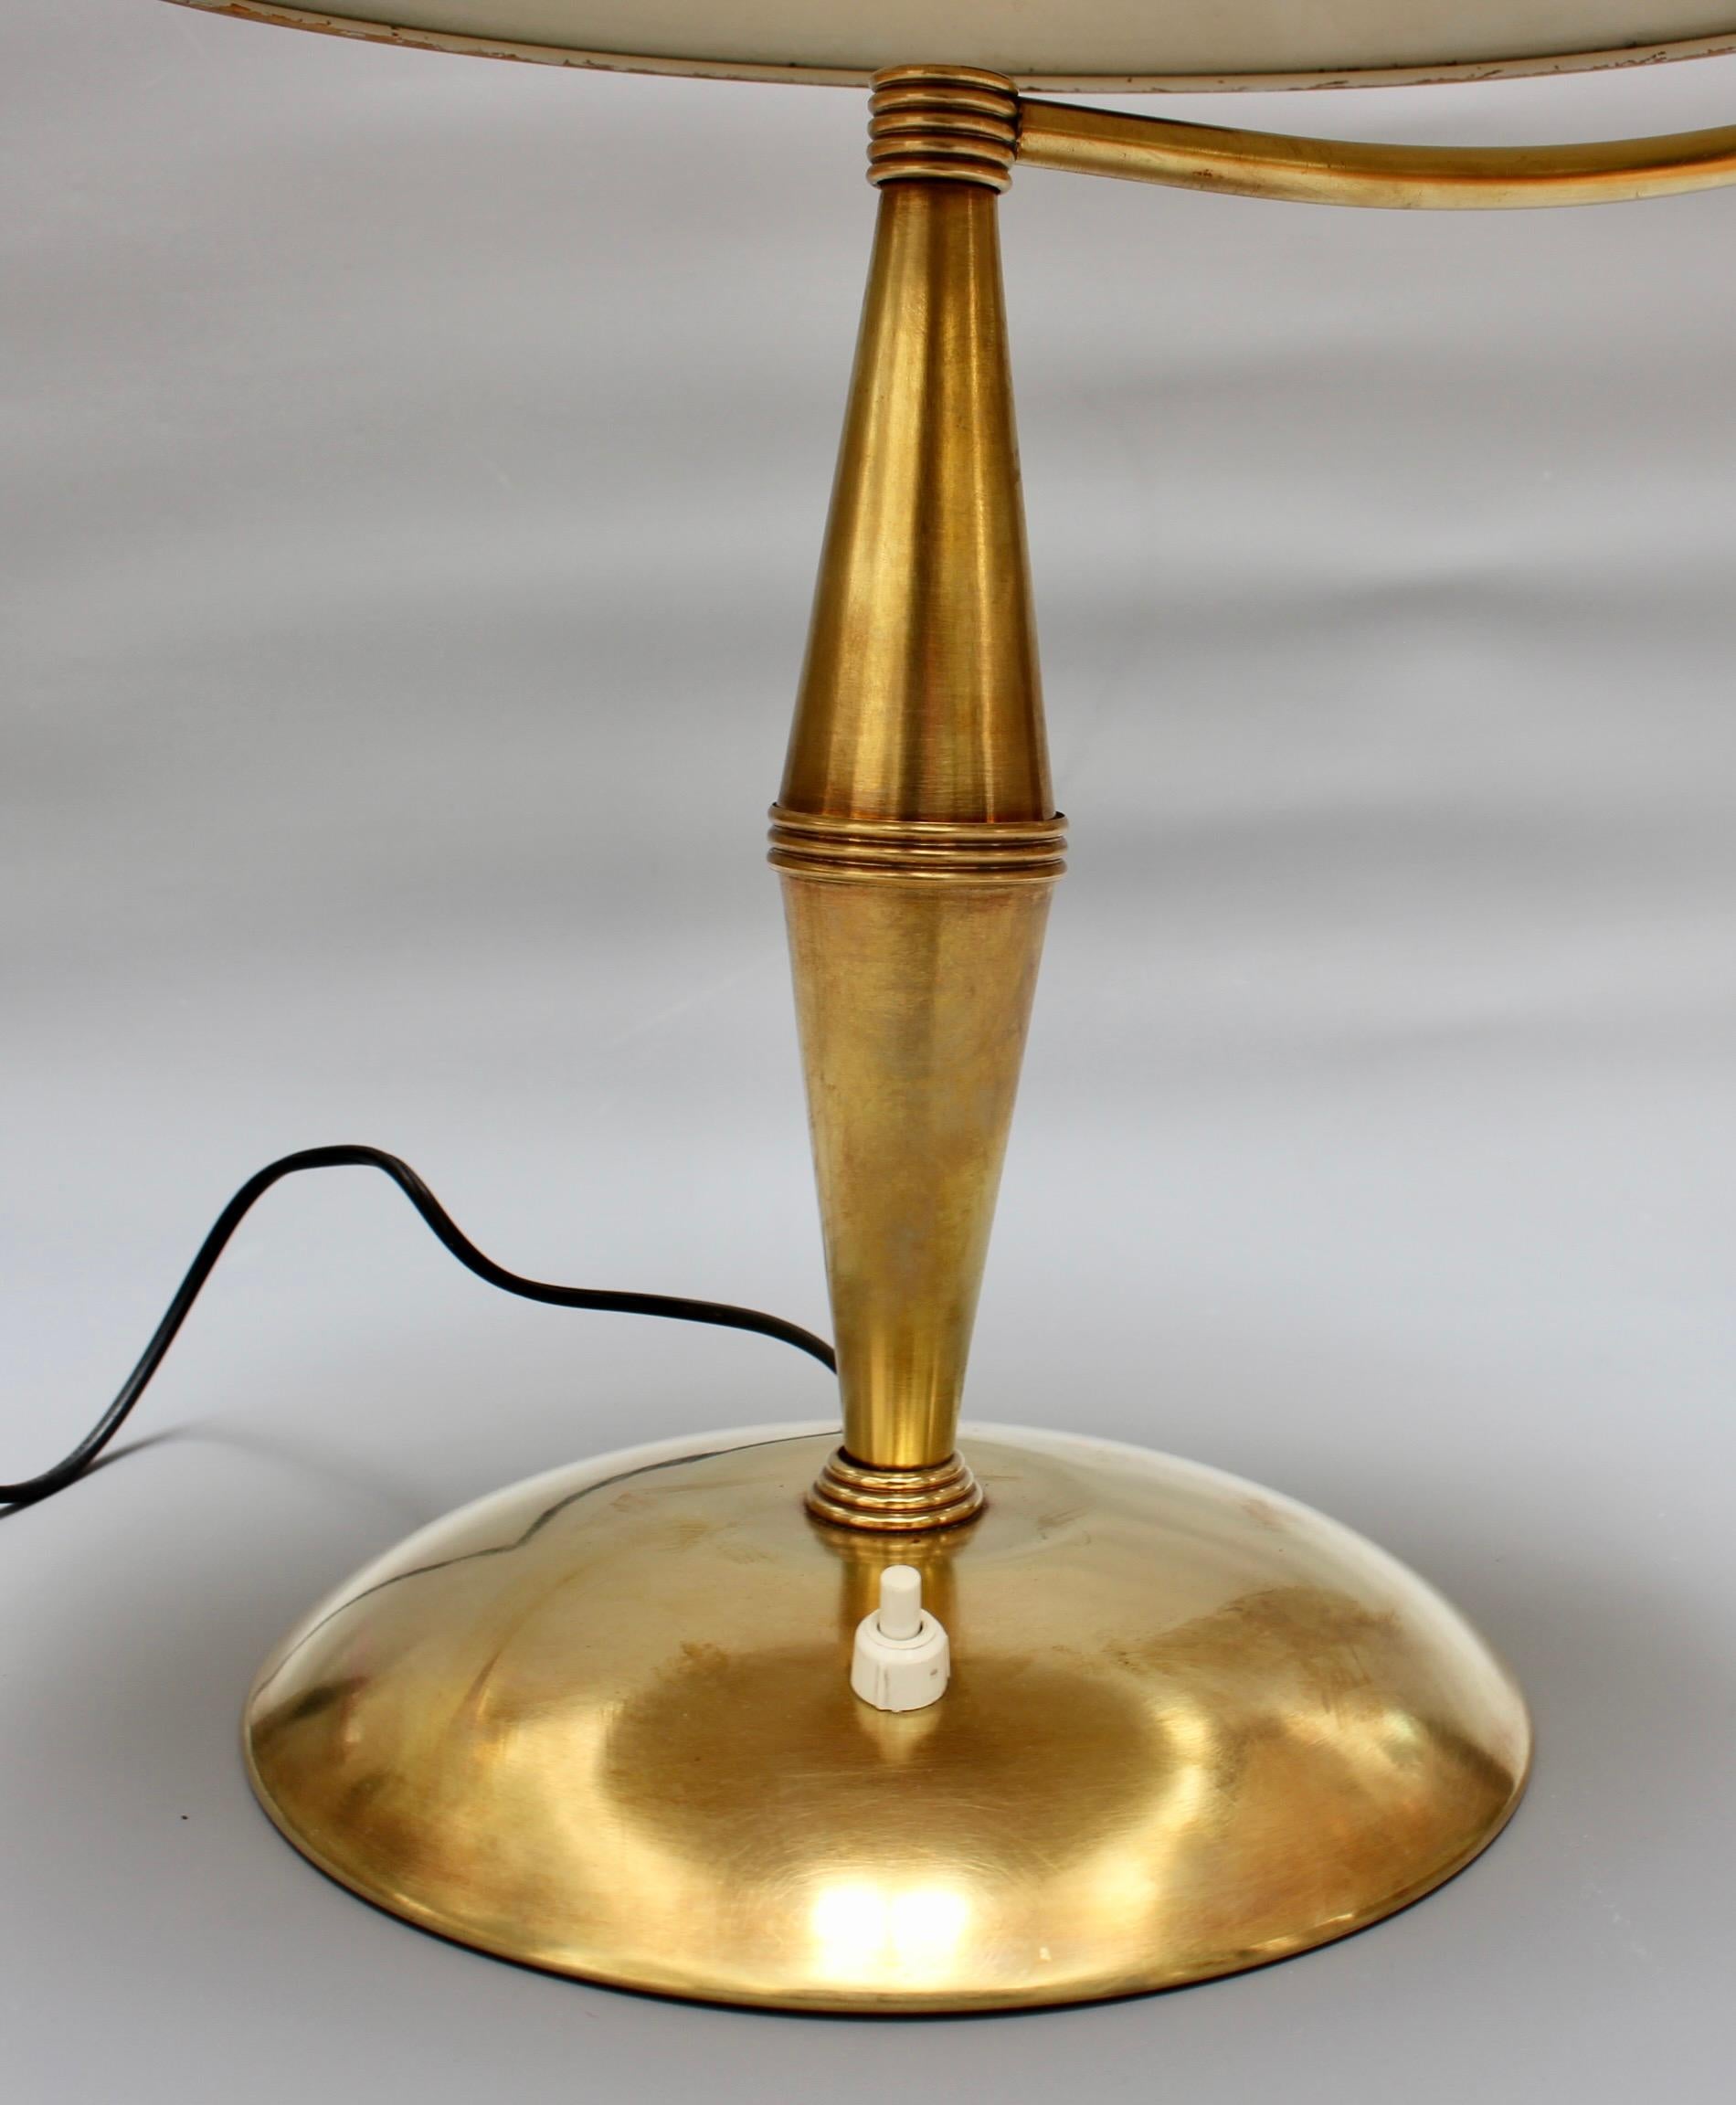 Italian Vintage Brass Table Lamp with Swivel Arm 'circa 1950s' For Sale 2